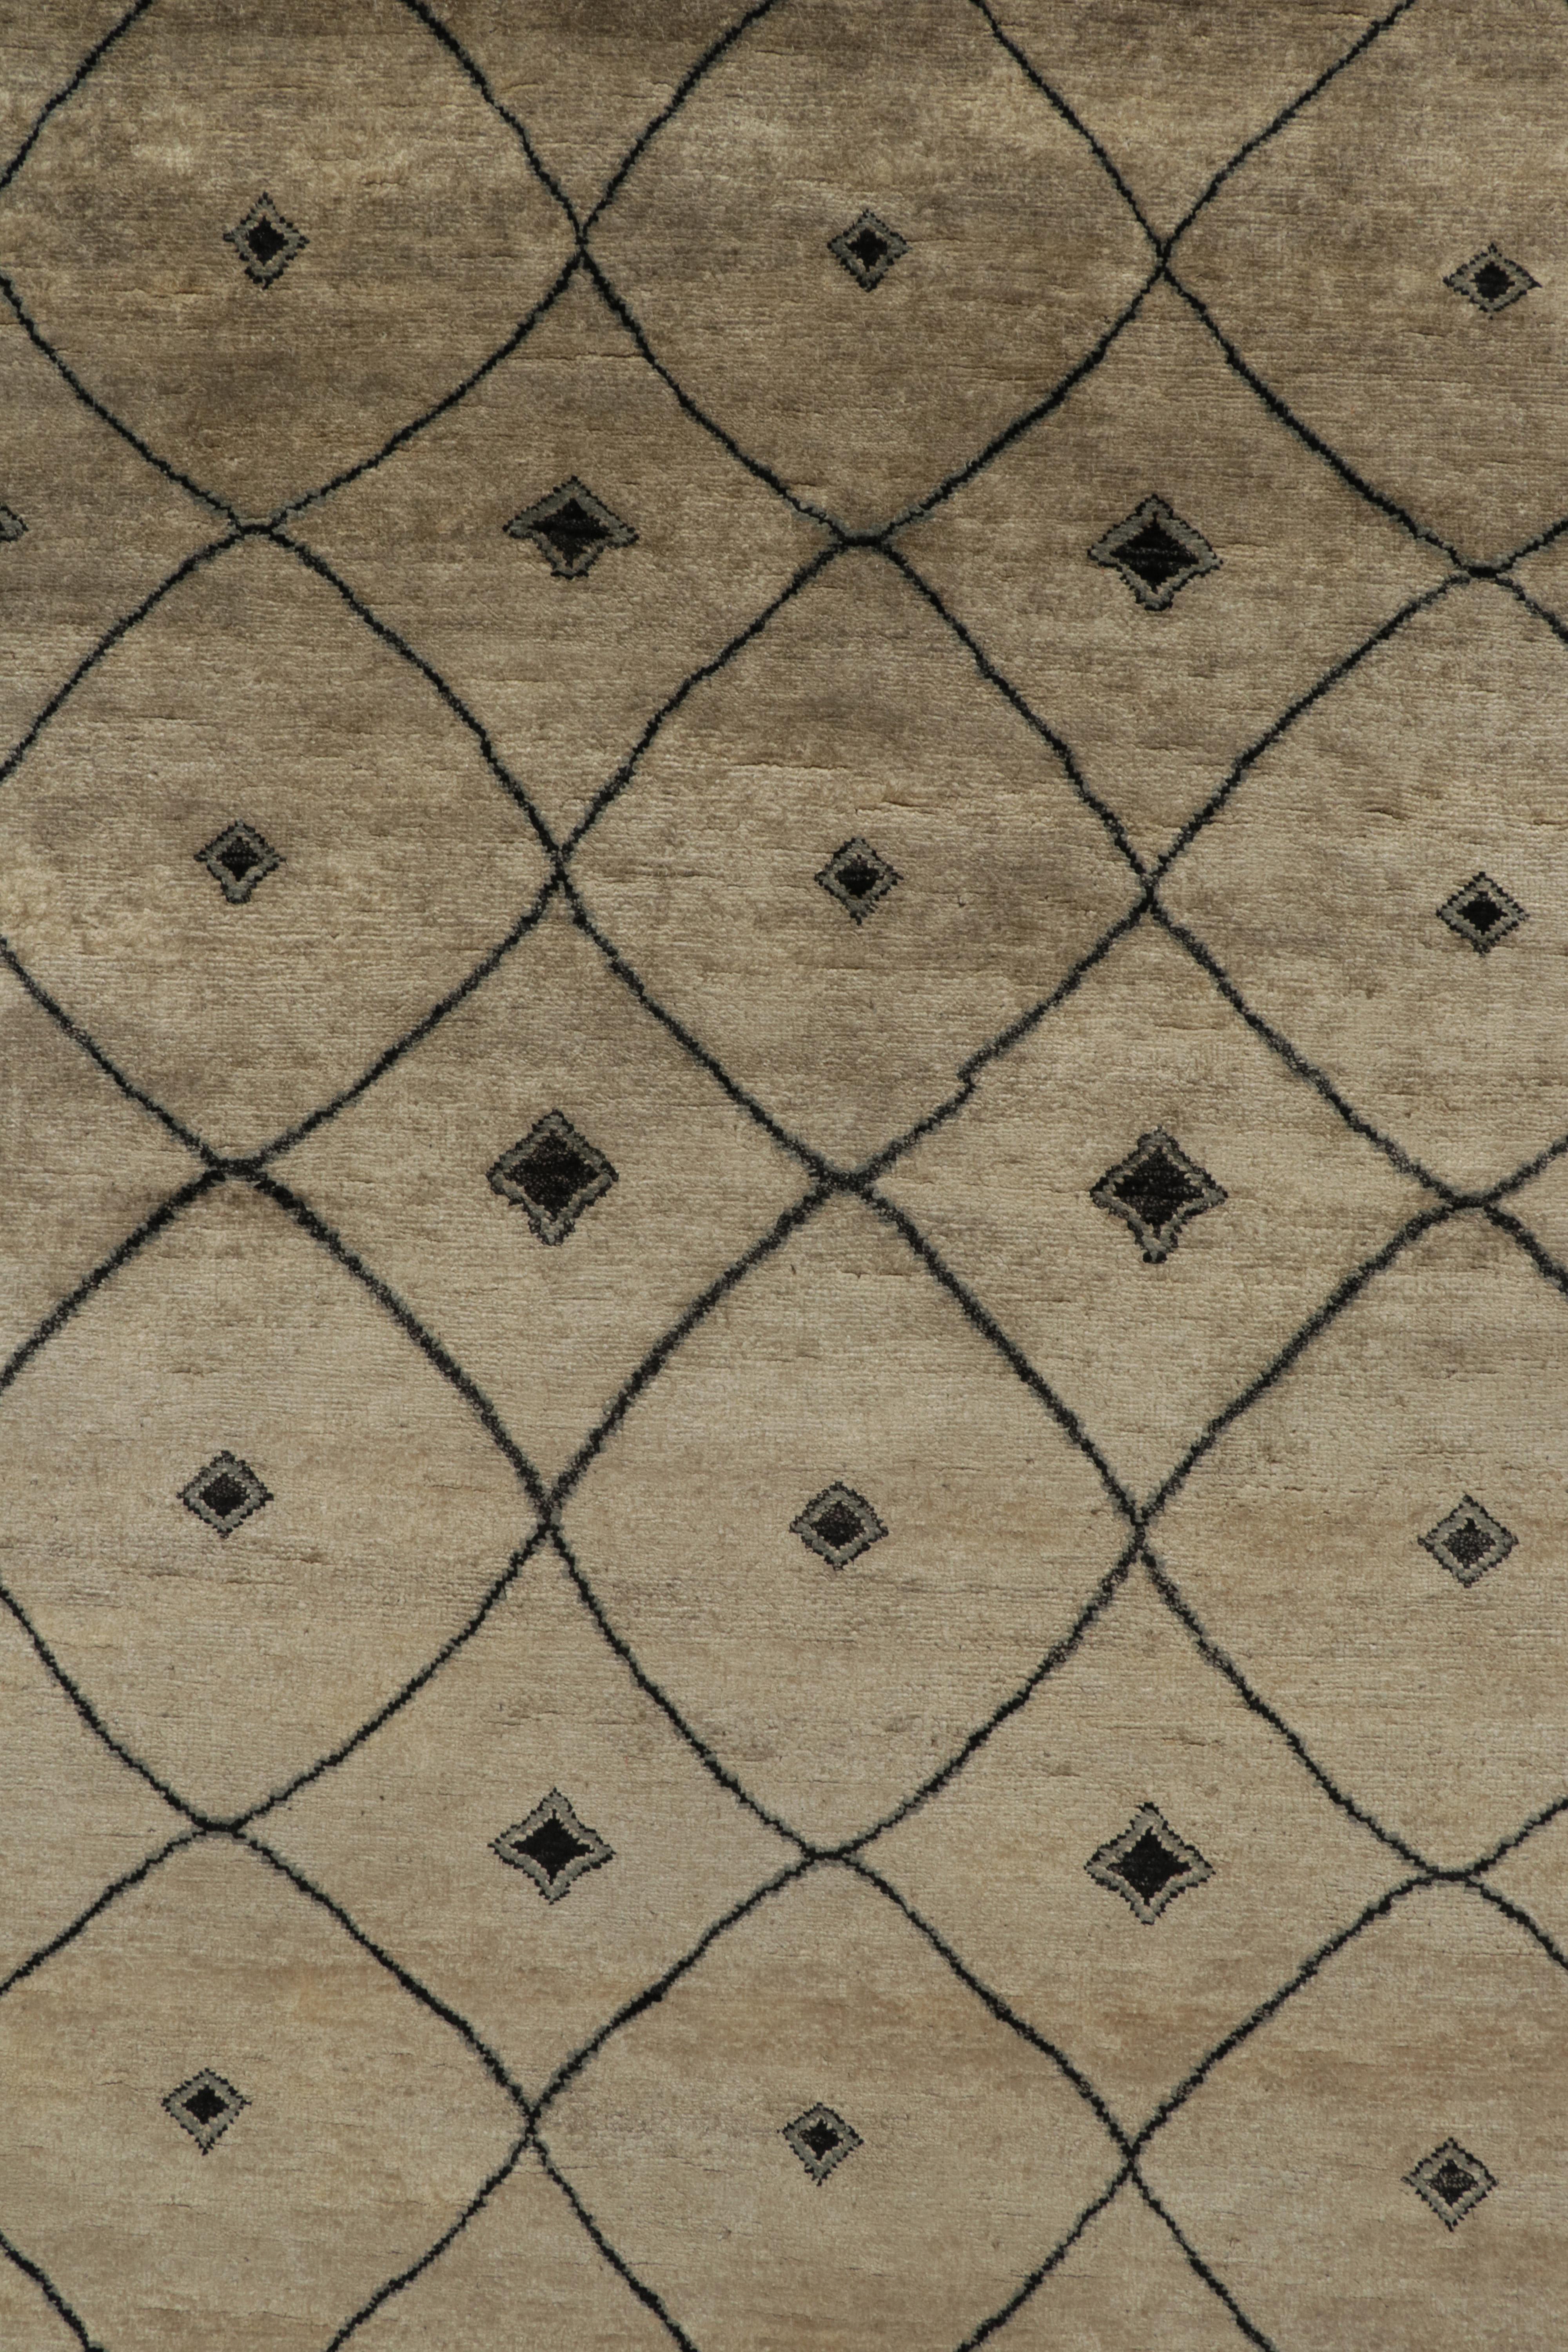 Contemporary Rug & Kilim’s Moroccan style rug in Beige-Brown with Black Trellis Pattern For Sale